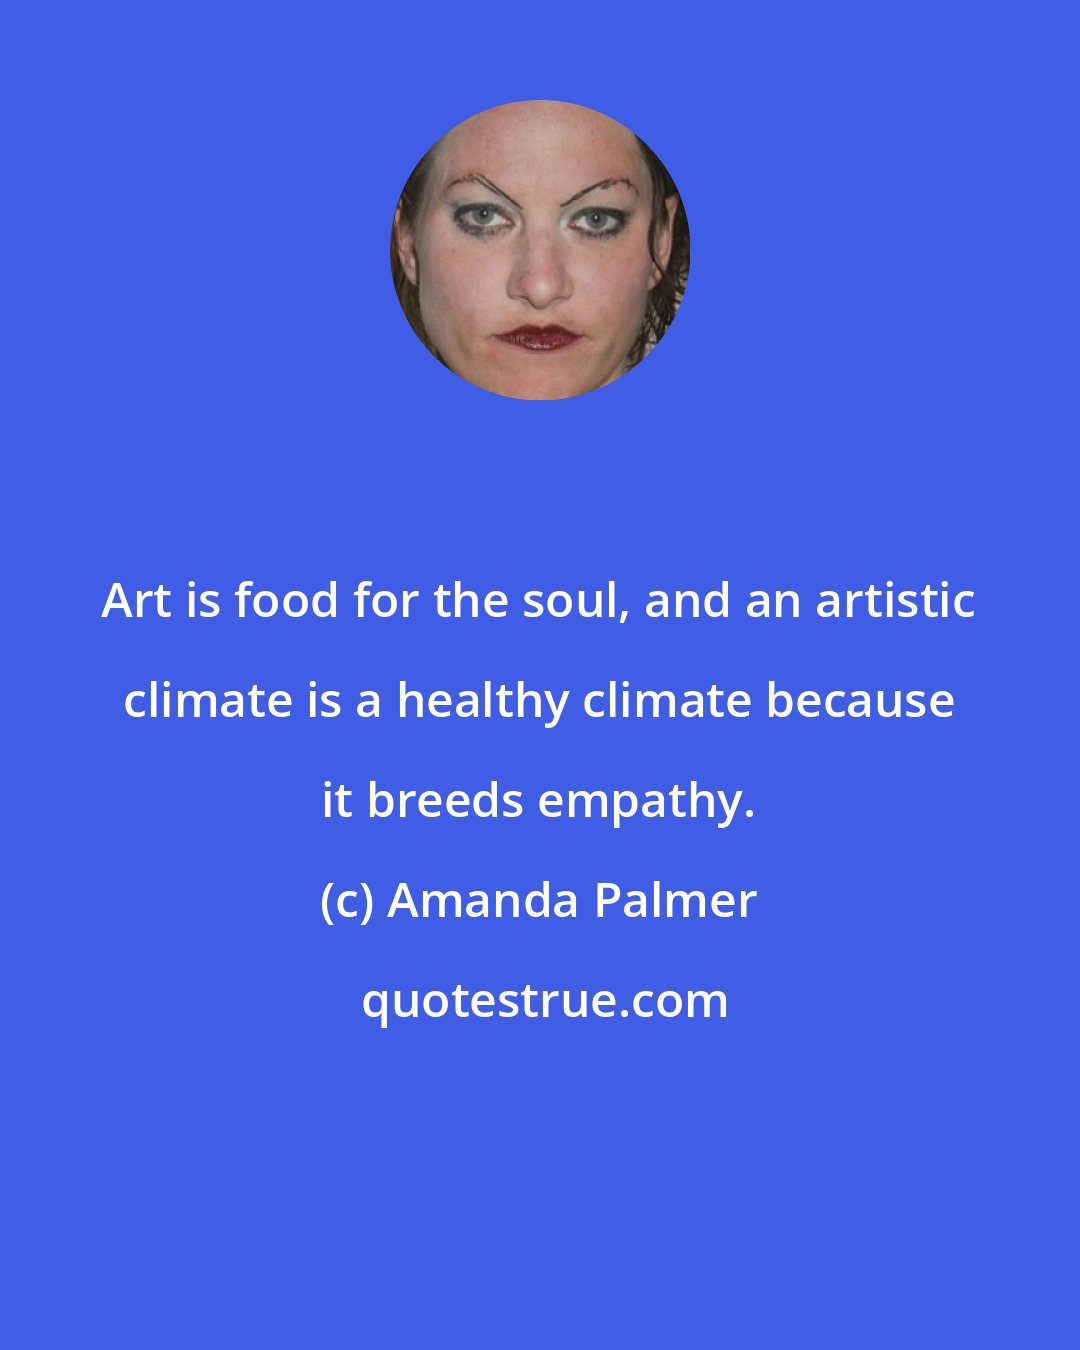 Amanda Palmer: Art is food for the soul, and an artistic climate is a healthy climate because it breeds empathy.